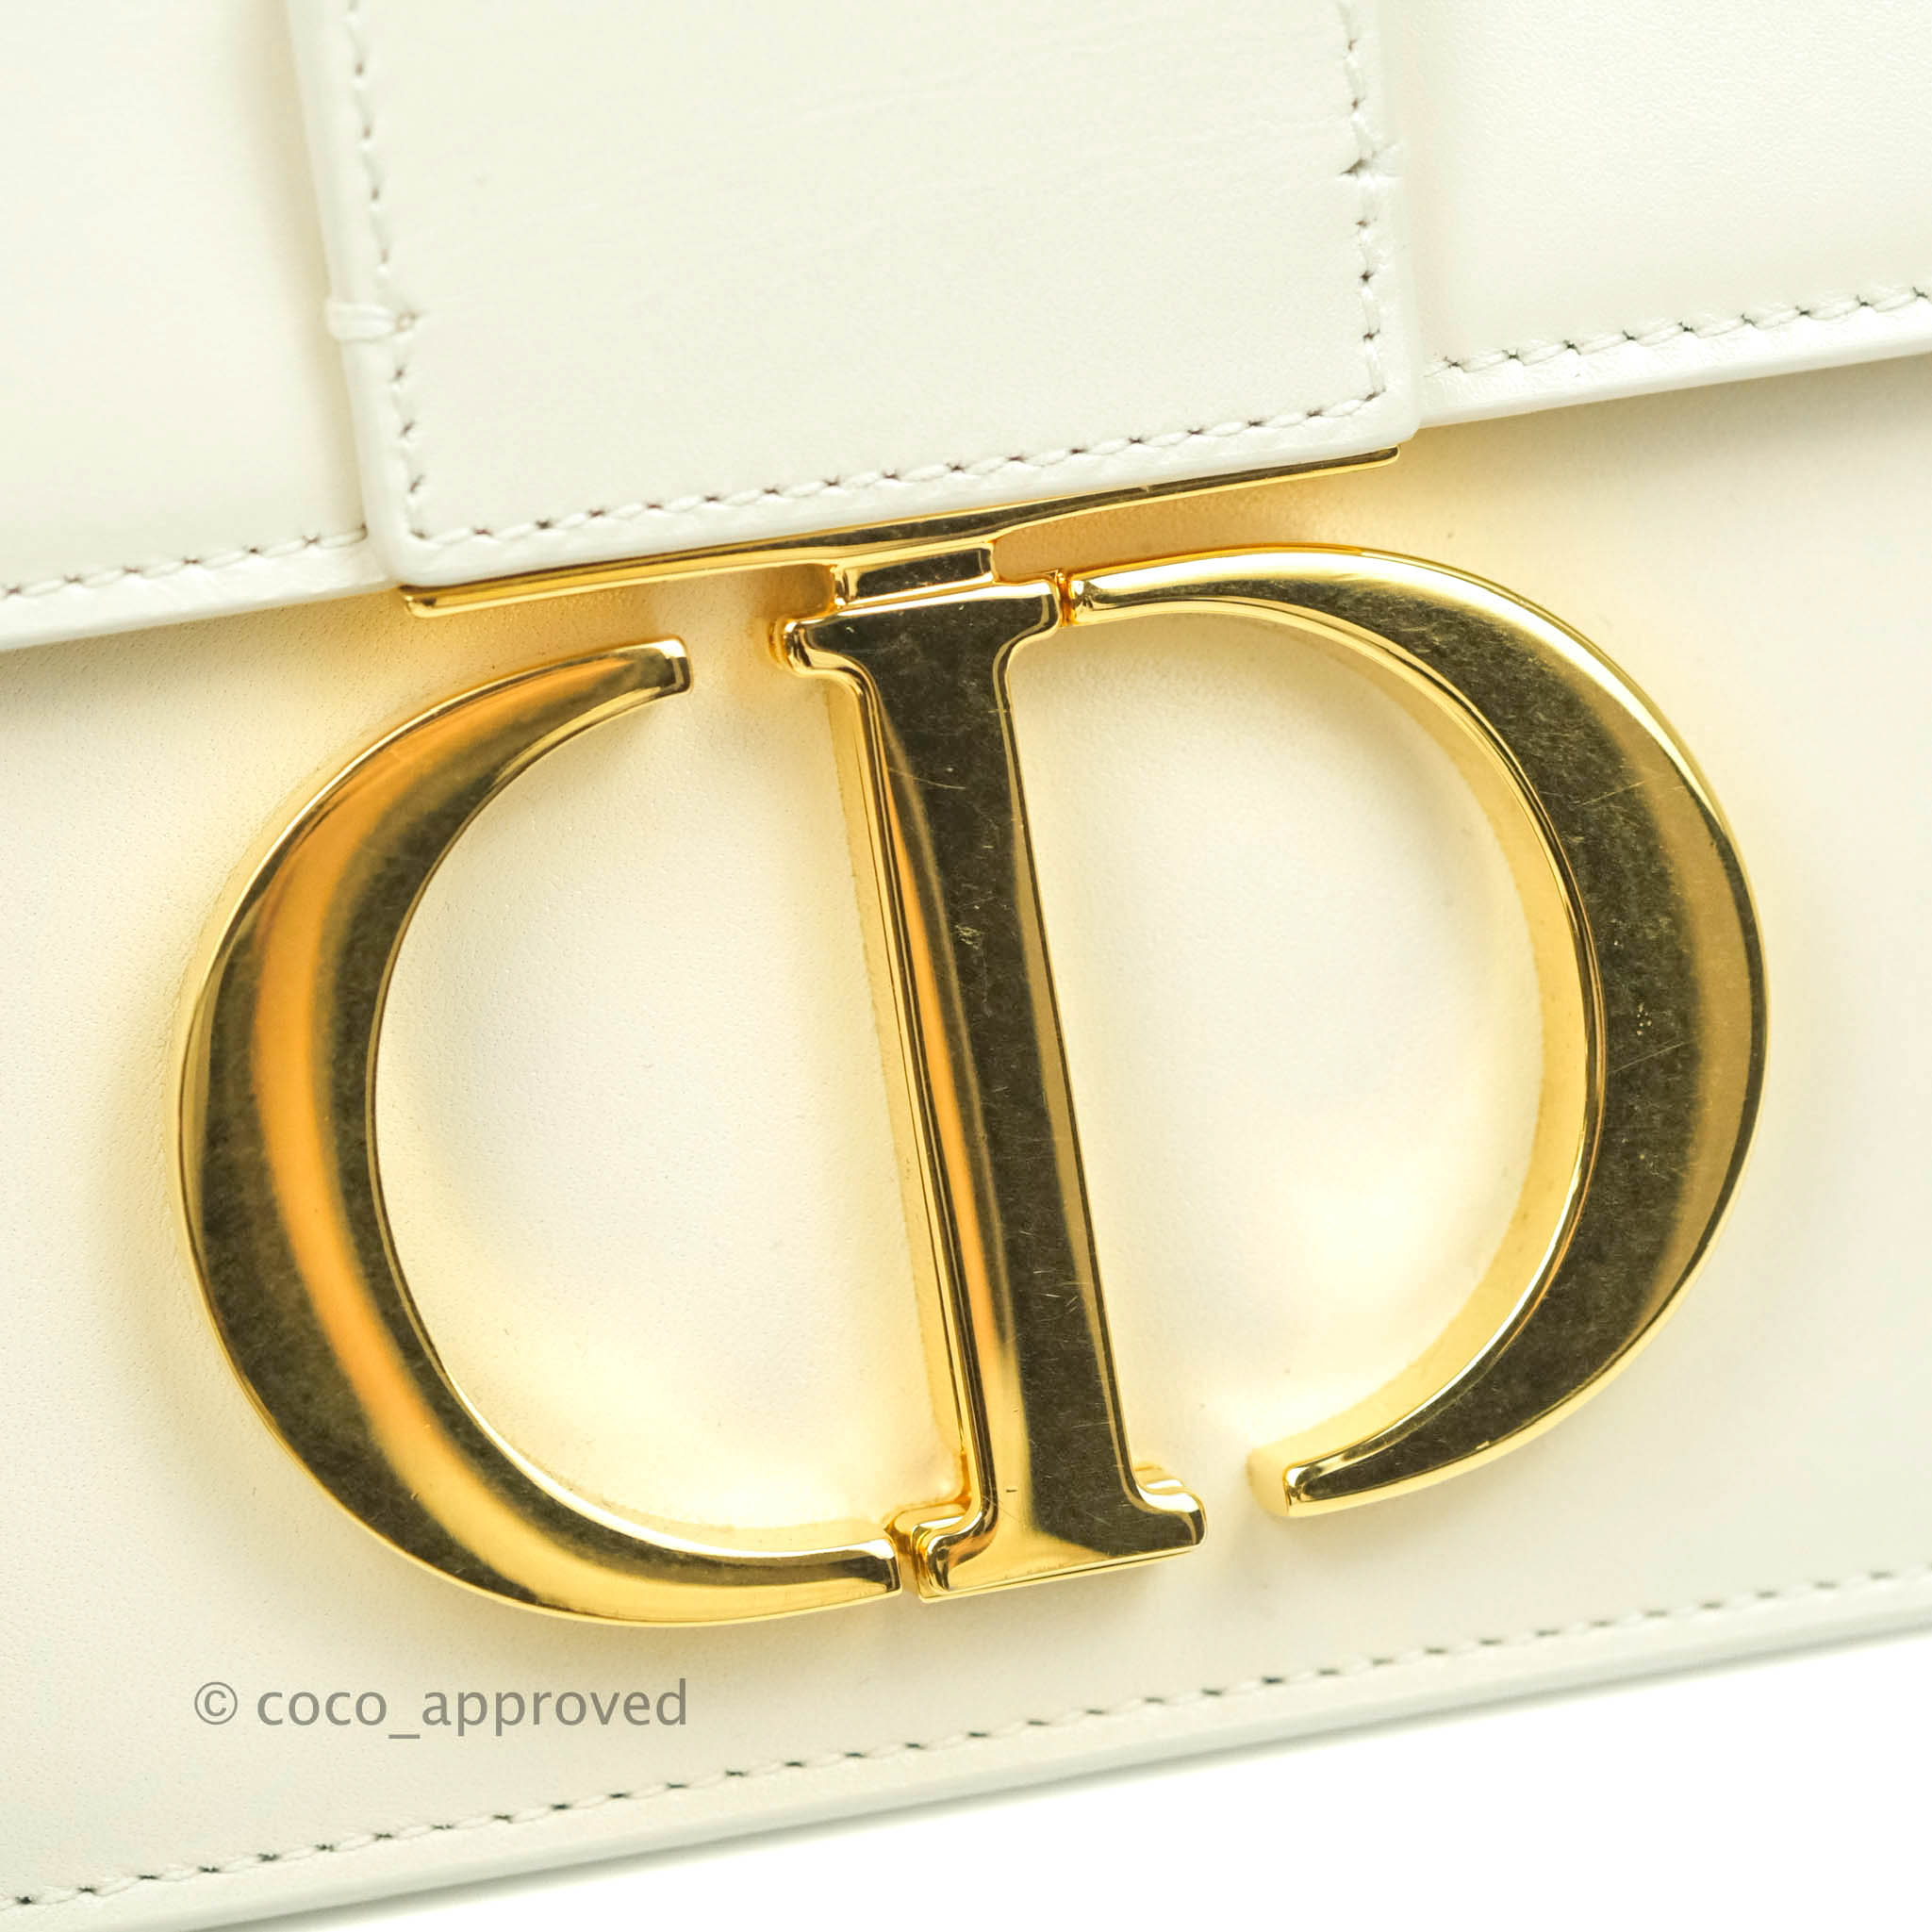 Christian Dior White Calfskin 30 Montaigne Bag Gold Hardware Available For  Immediate Sale At Sotheby's